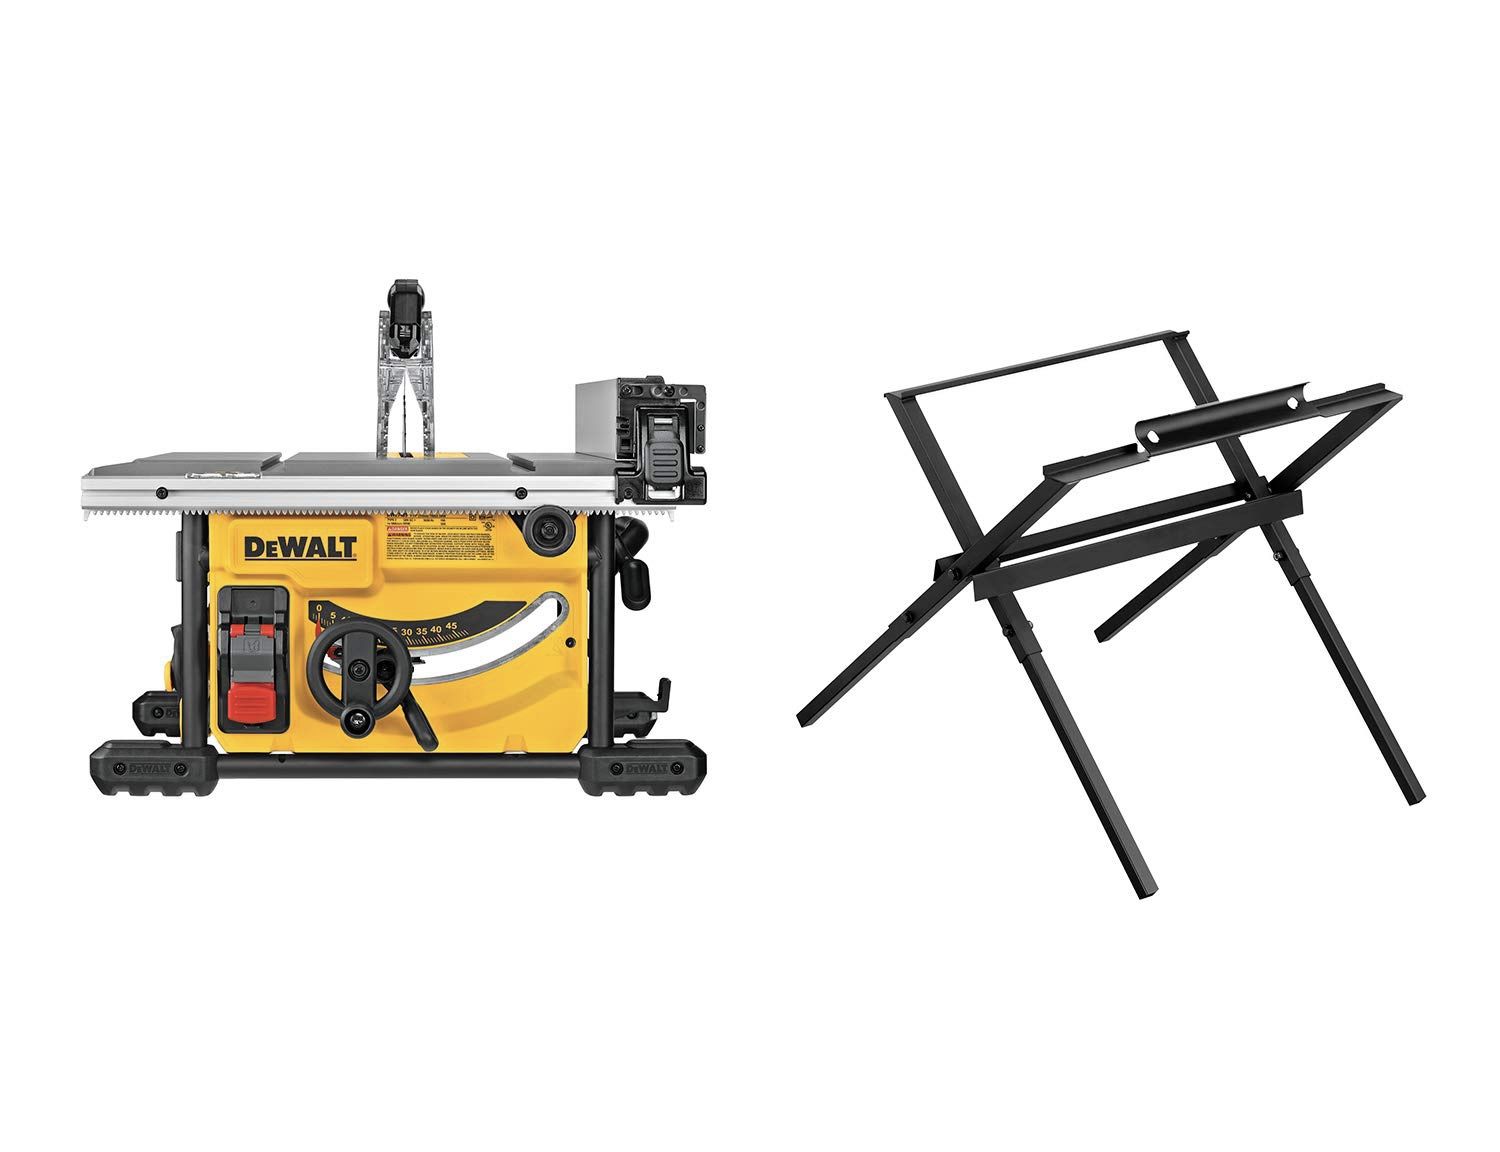 New in box DEWALT DWE7485WS 8-1/4 in. Compact Jobsite Table Saw With Stand